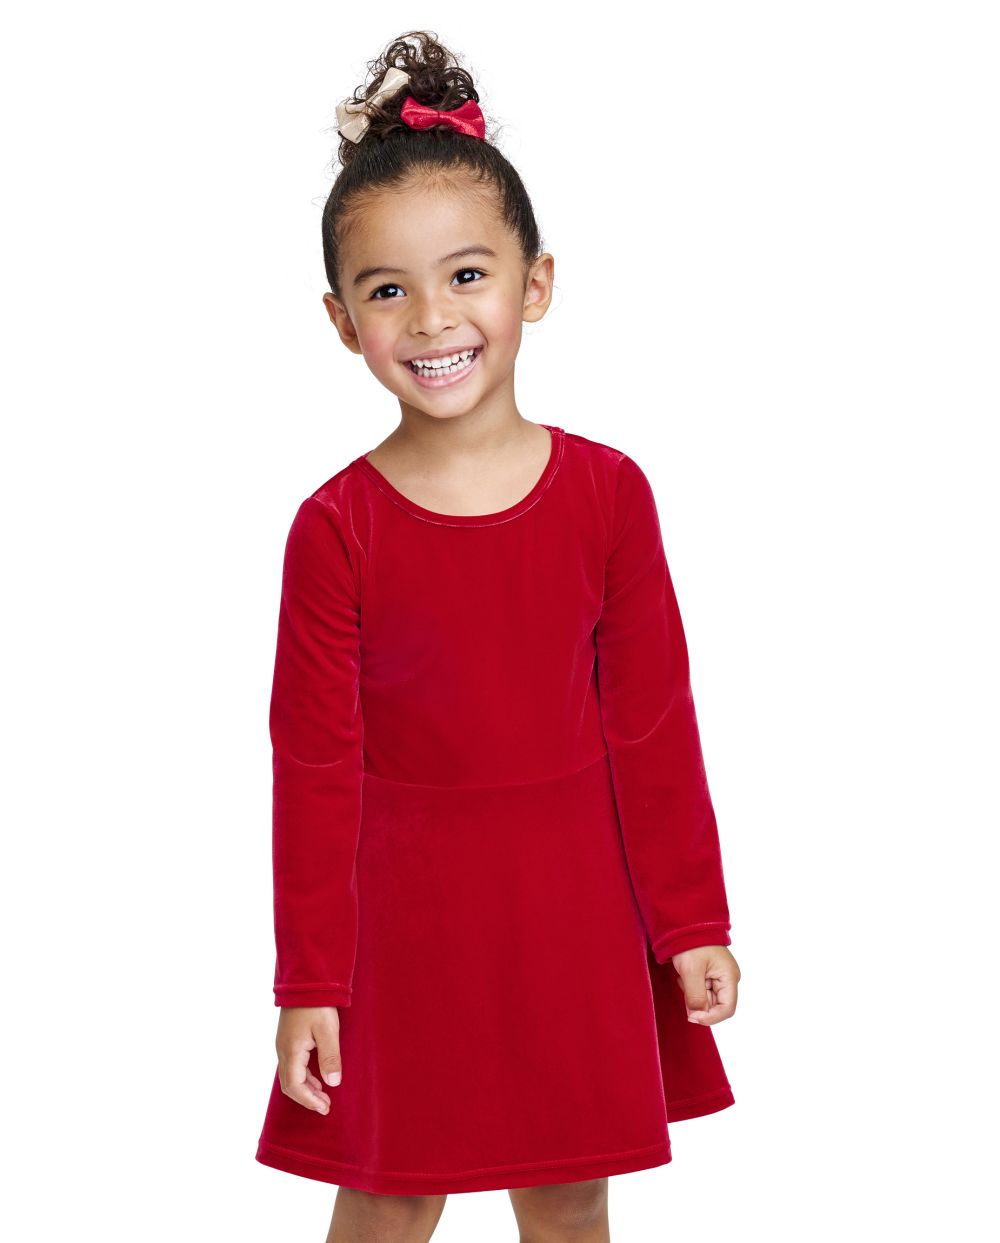 Toddler Baby Cutout Above the Knee Long Sleeves Dress